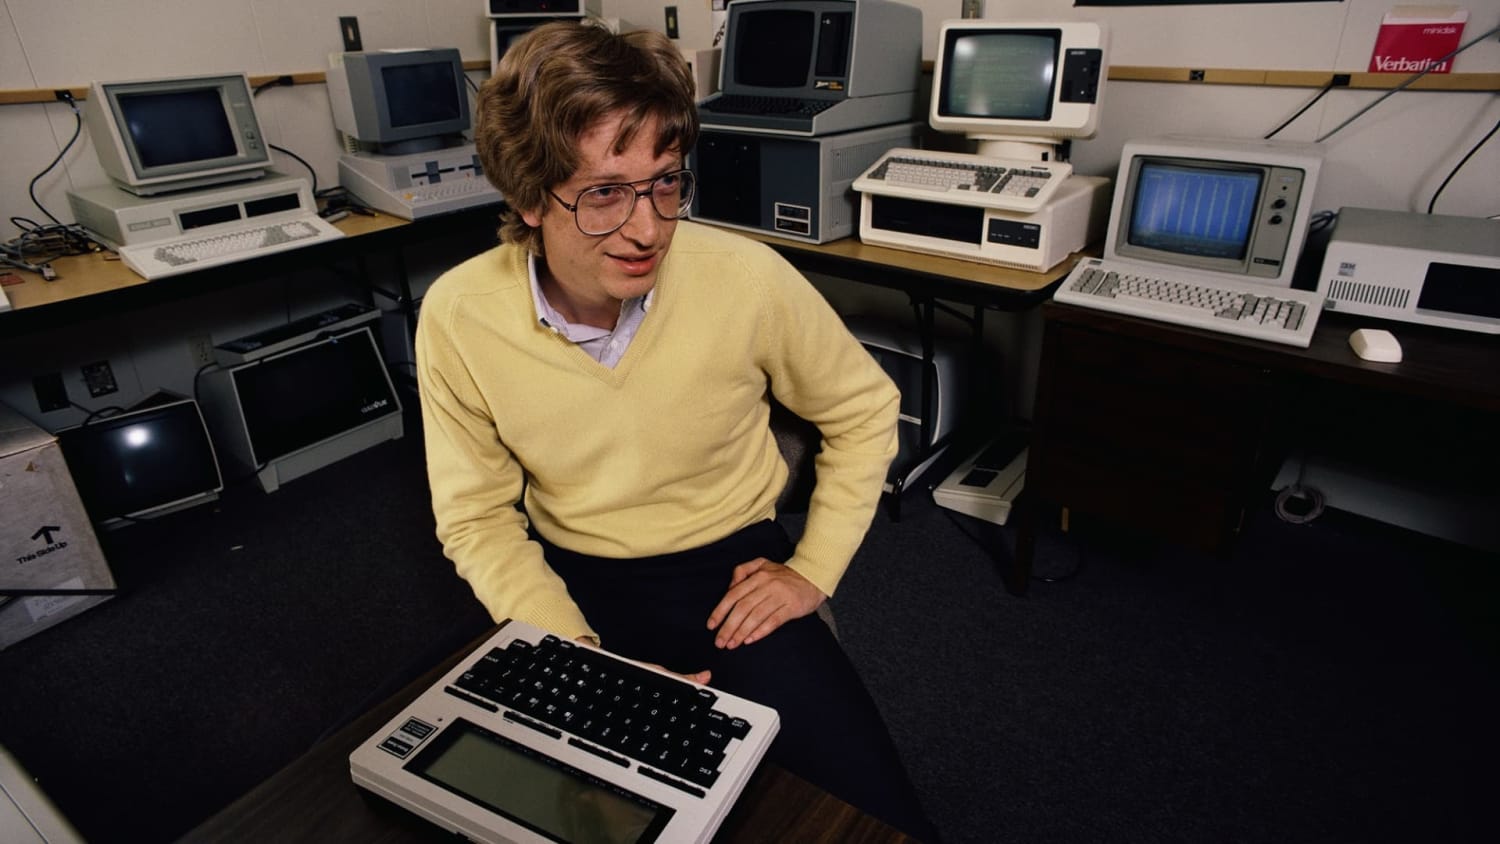 Here's why Bill Gates stopped listening to music and watching TV for 5 years in his 20s